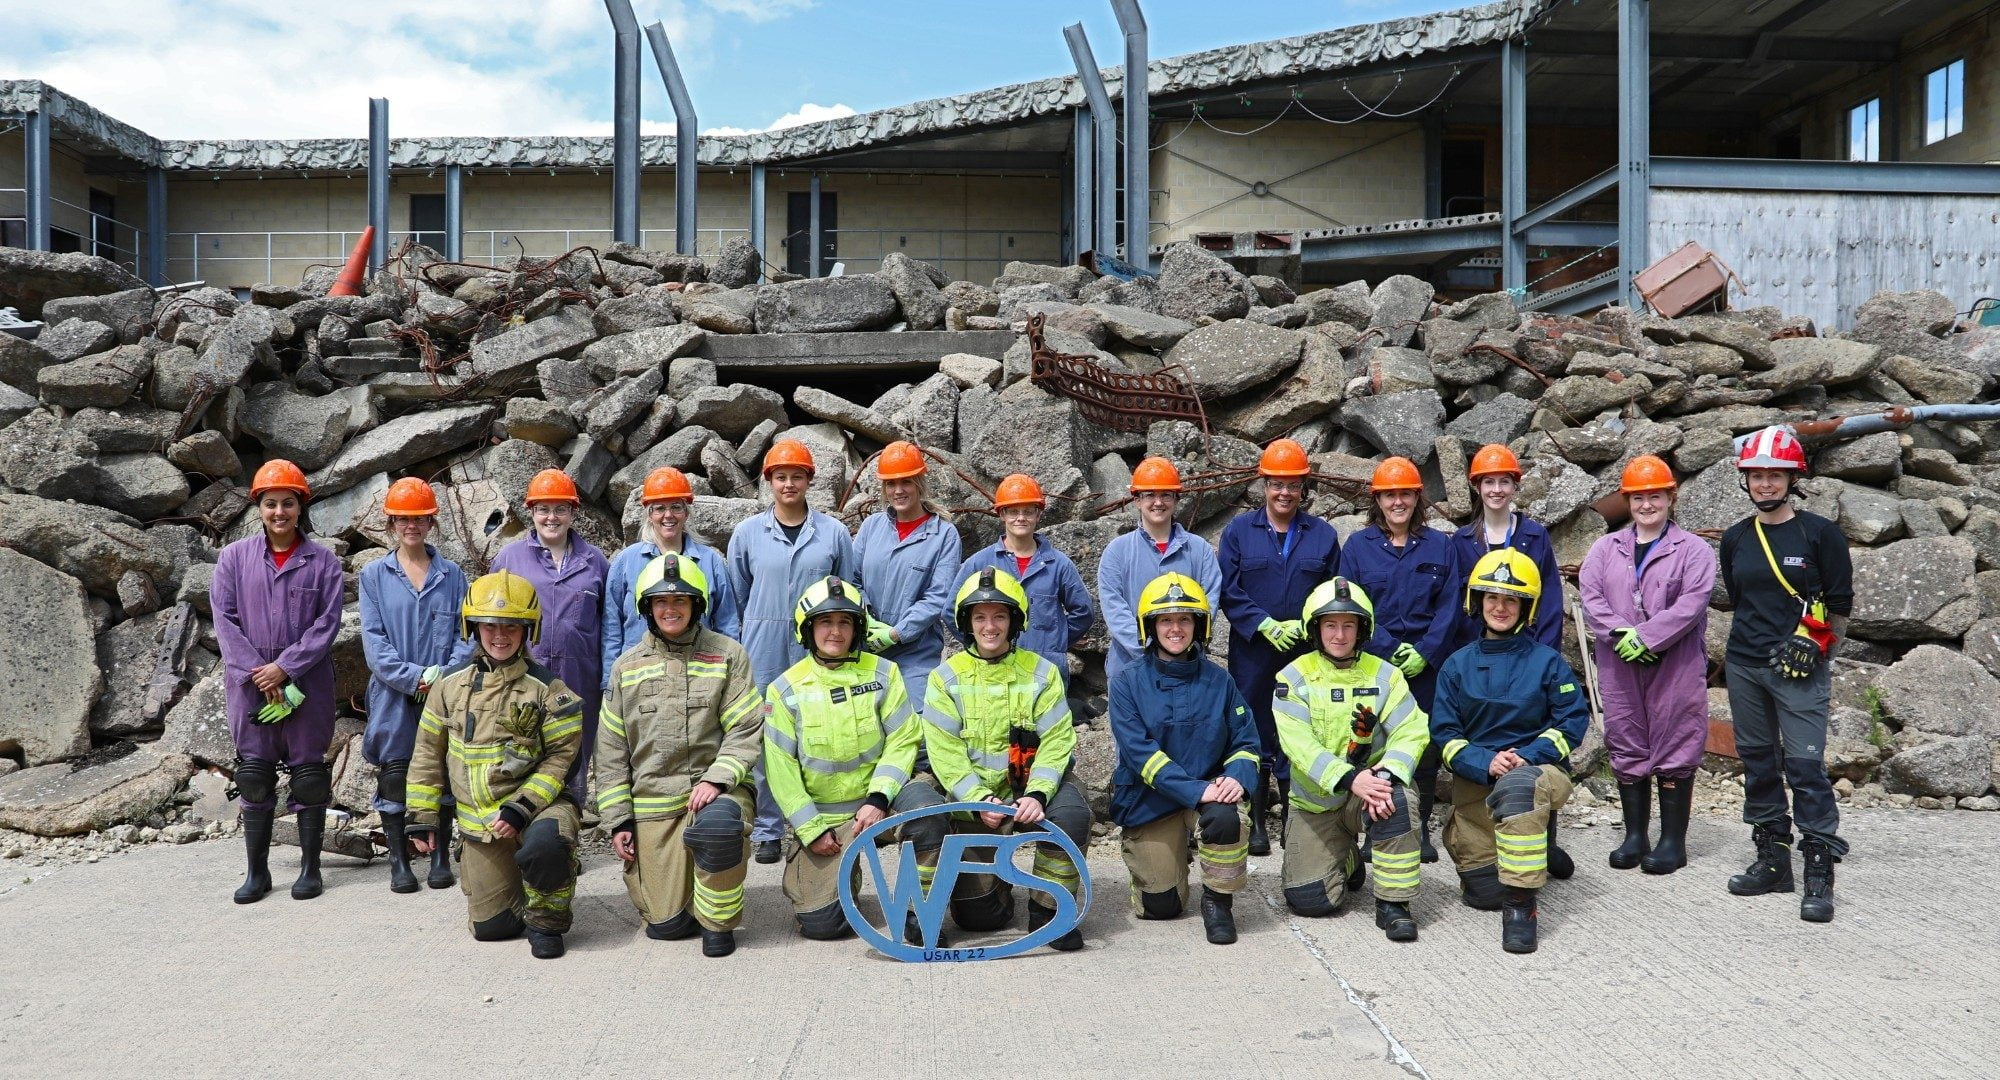 Group of delegates together on the incident training ground